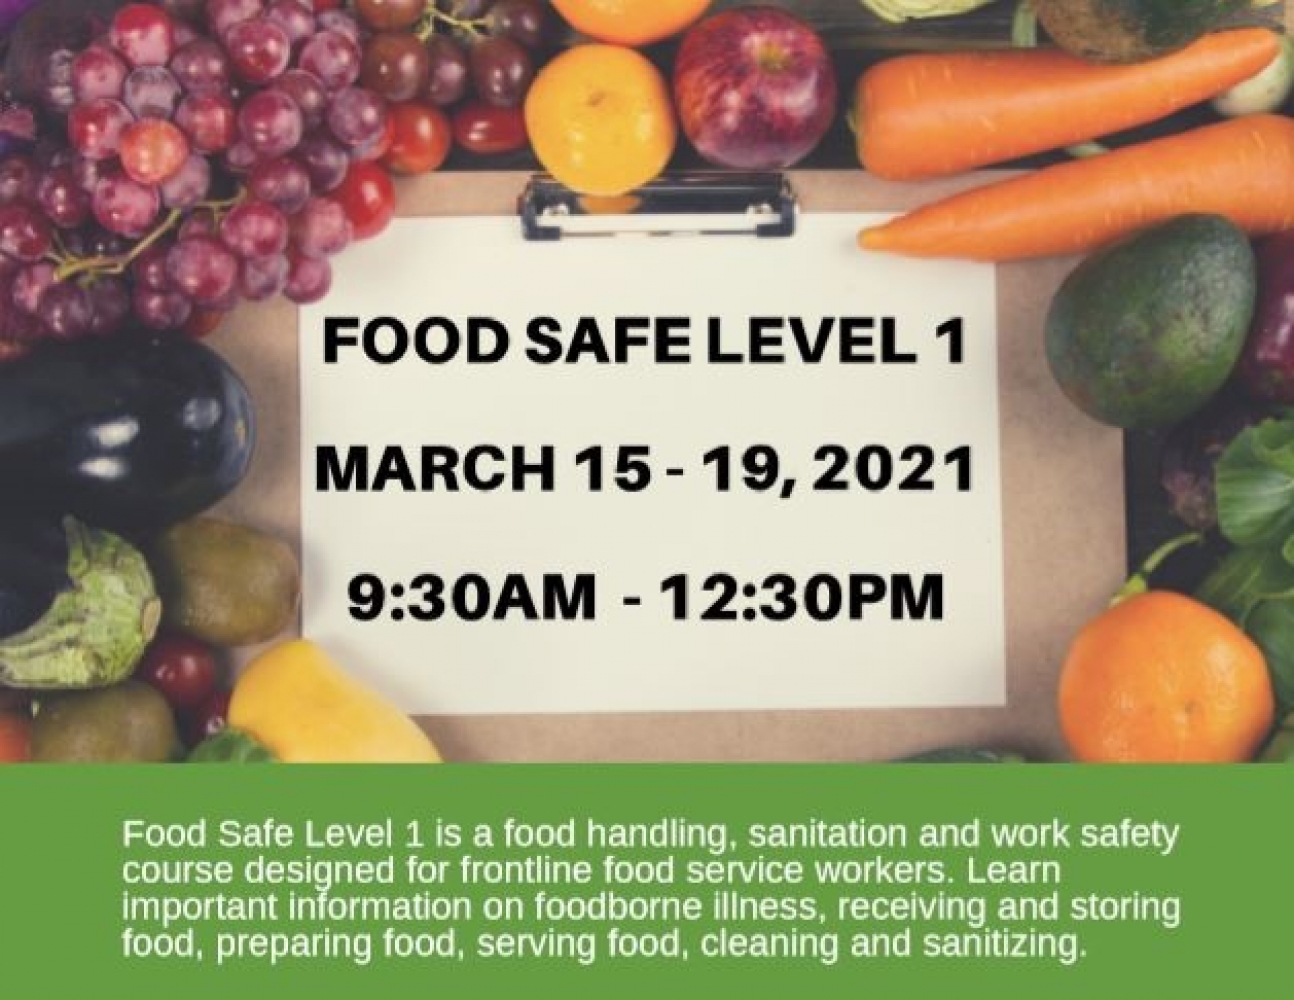 Food Safe Training: March 15 - 19th